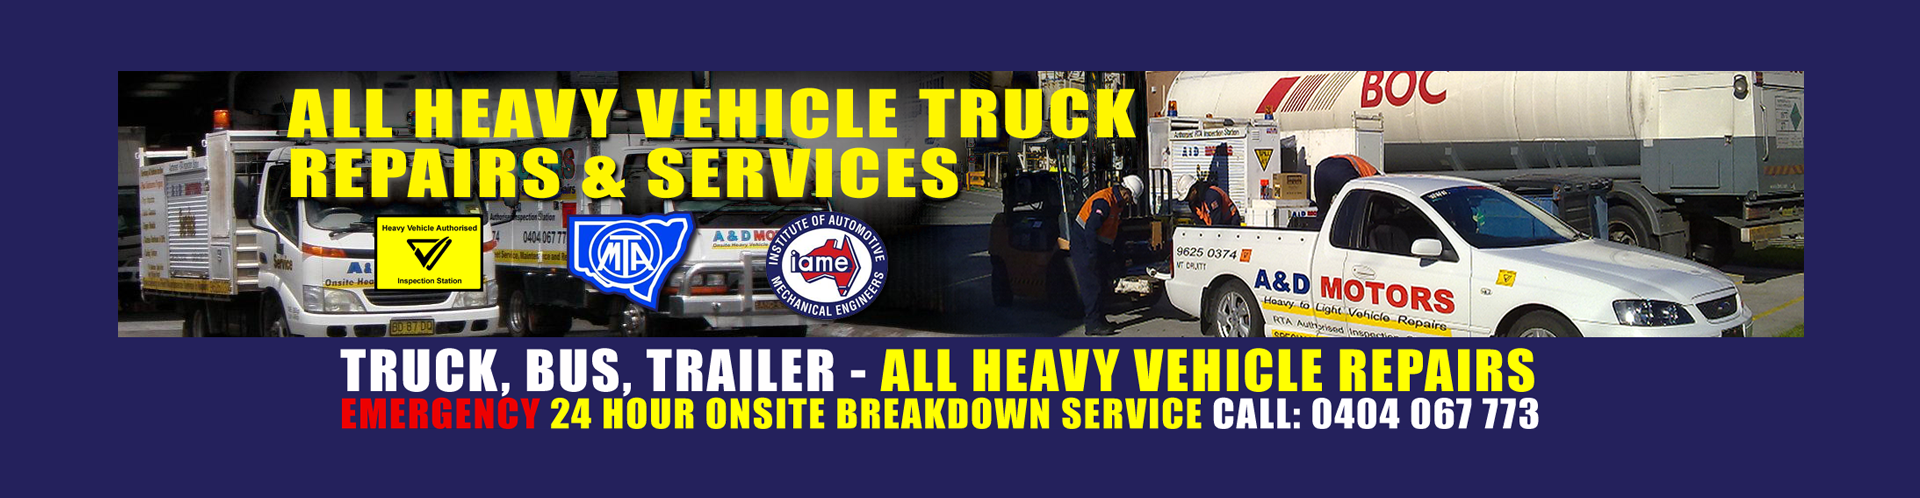 After Hours Truck Repairs Sydney